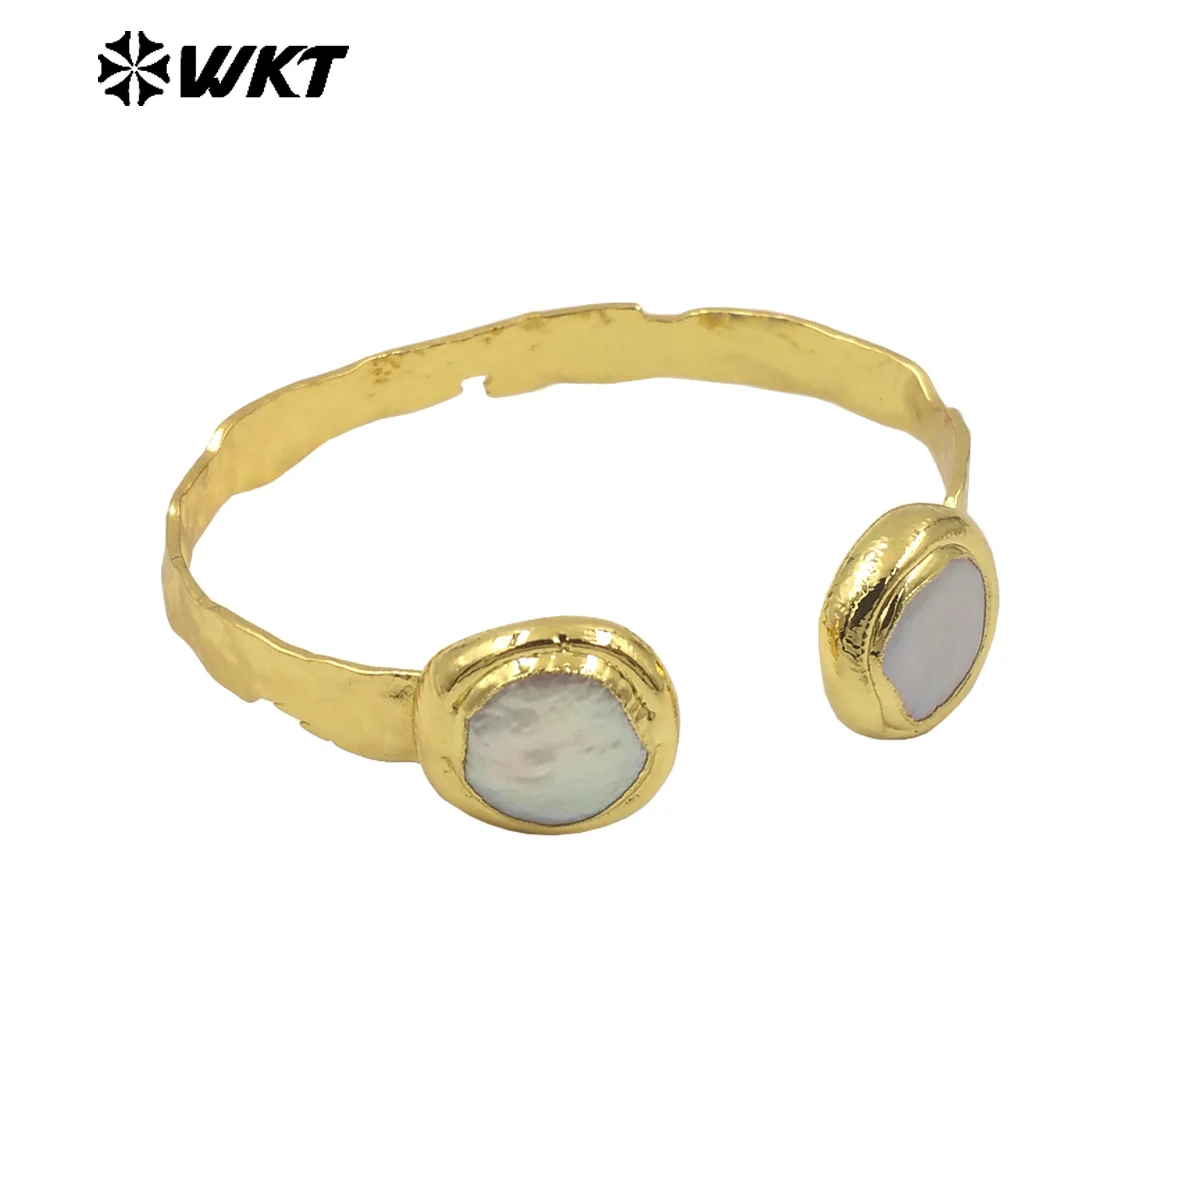 

WT-MPB102 New Arrival Classic Natural Round Pearl With 18k Gold Plating Cuff Bangle Can Be Adjustable For Friends Gifts